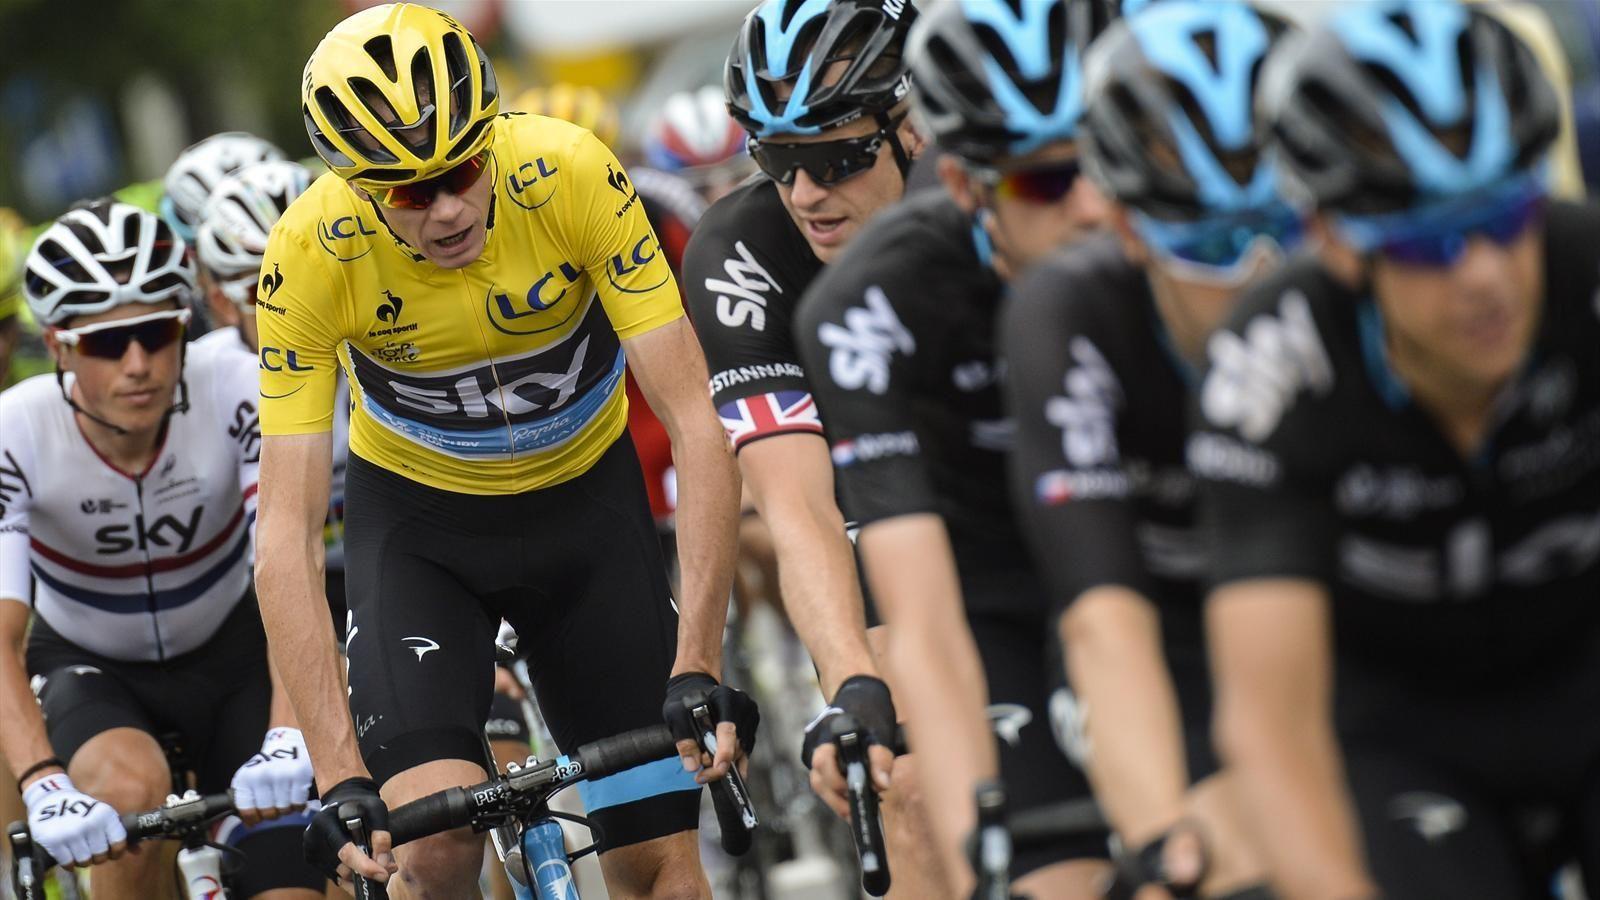 Team Sky fear Chris Froome 'data hack', probe launched de